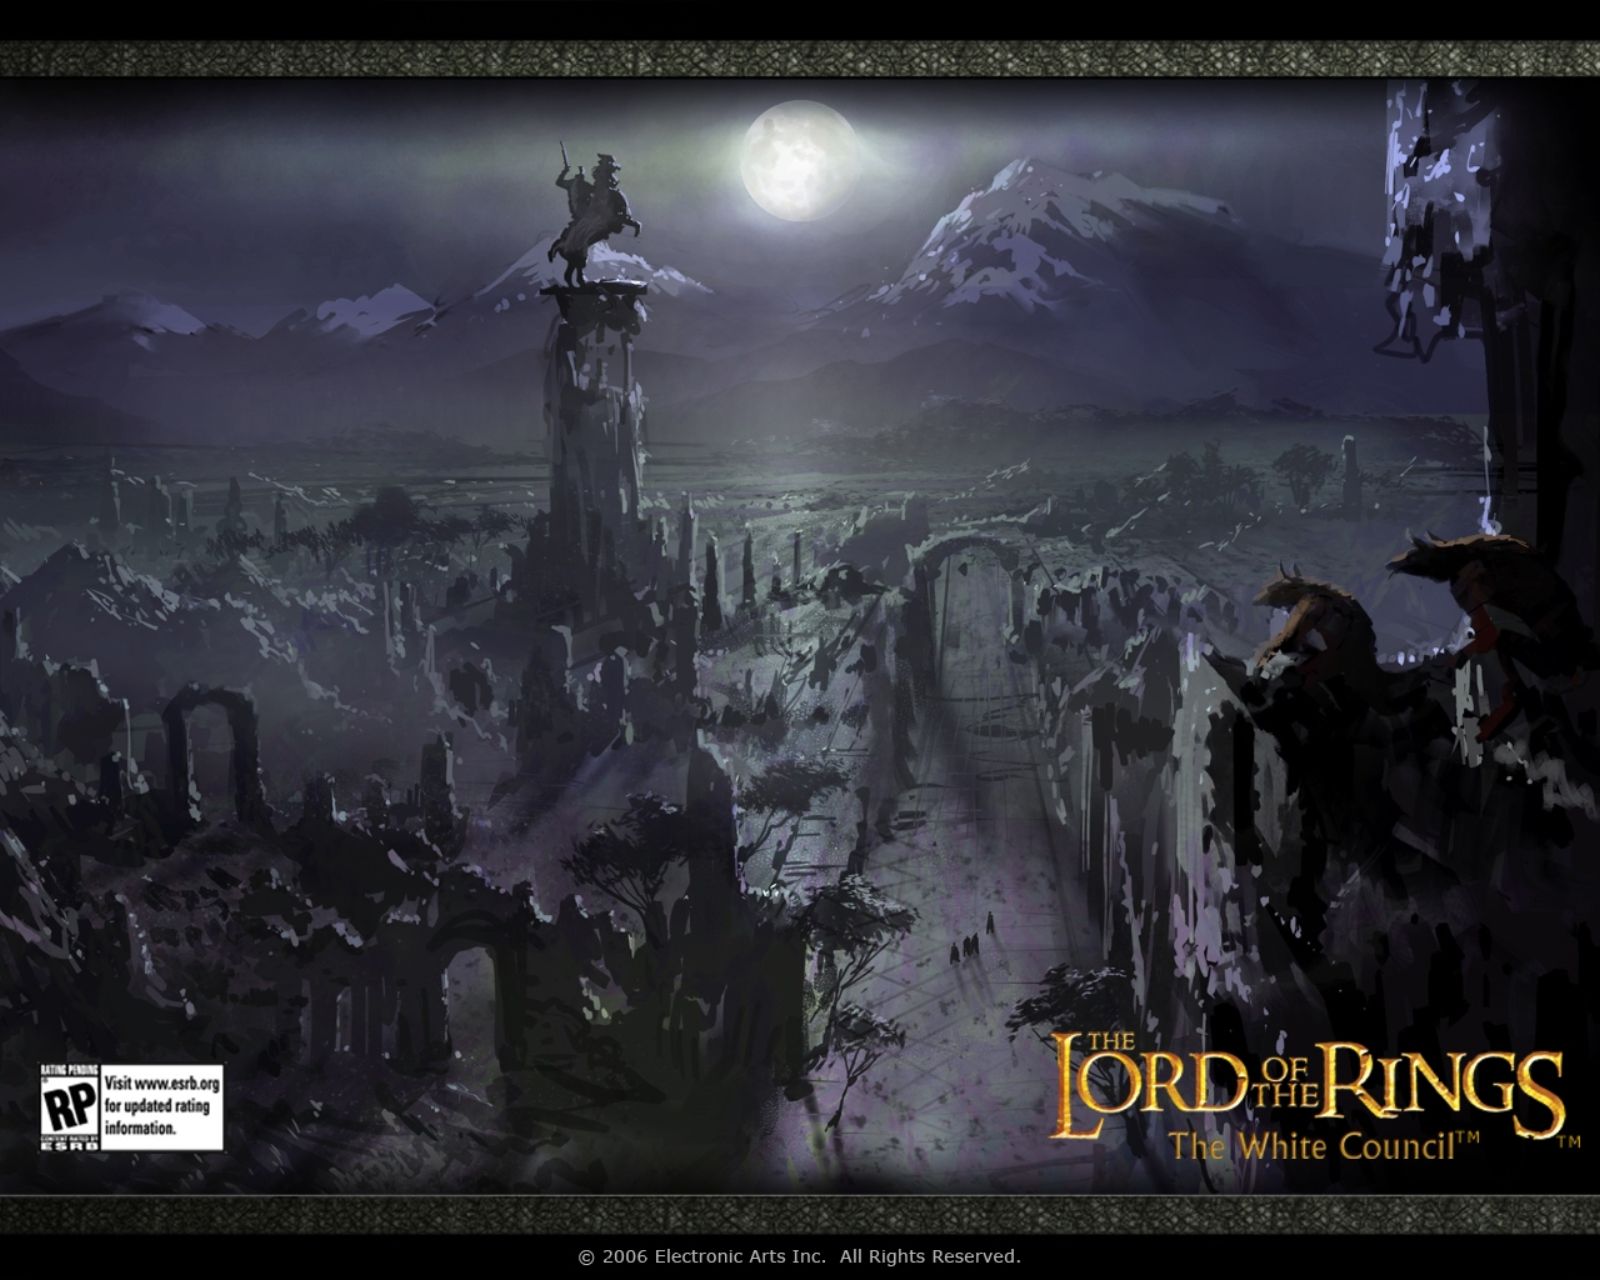 The Lord of the Rings - Games jeu vidéo Jeux